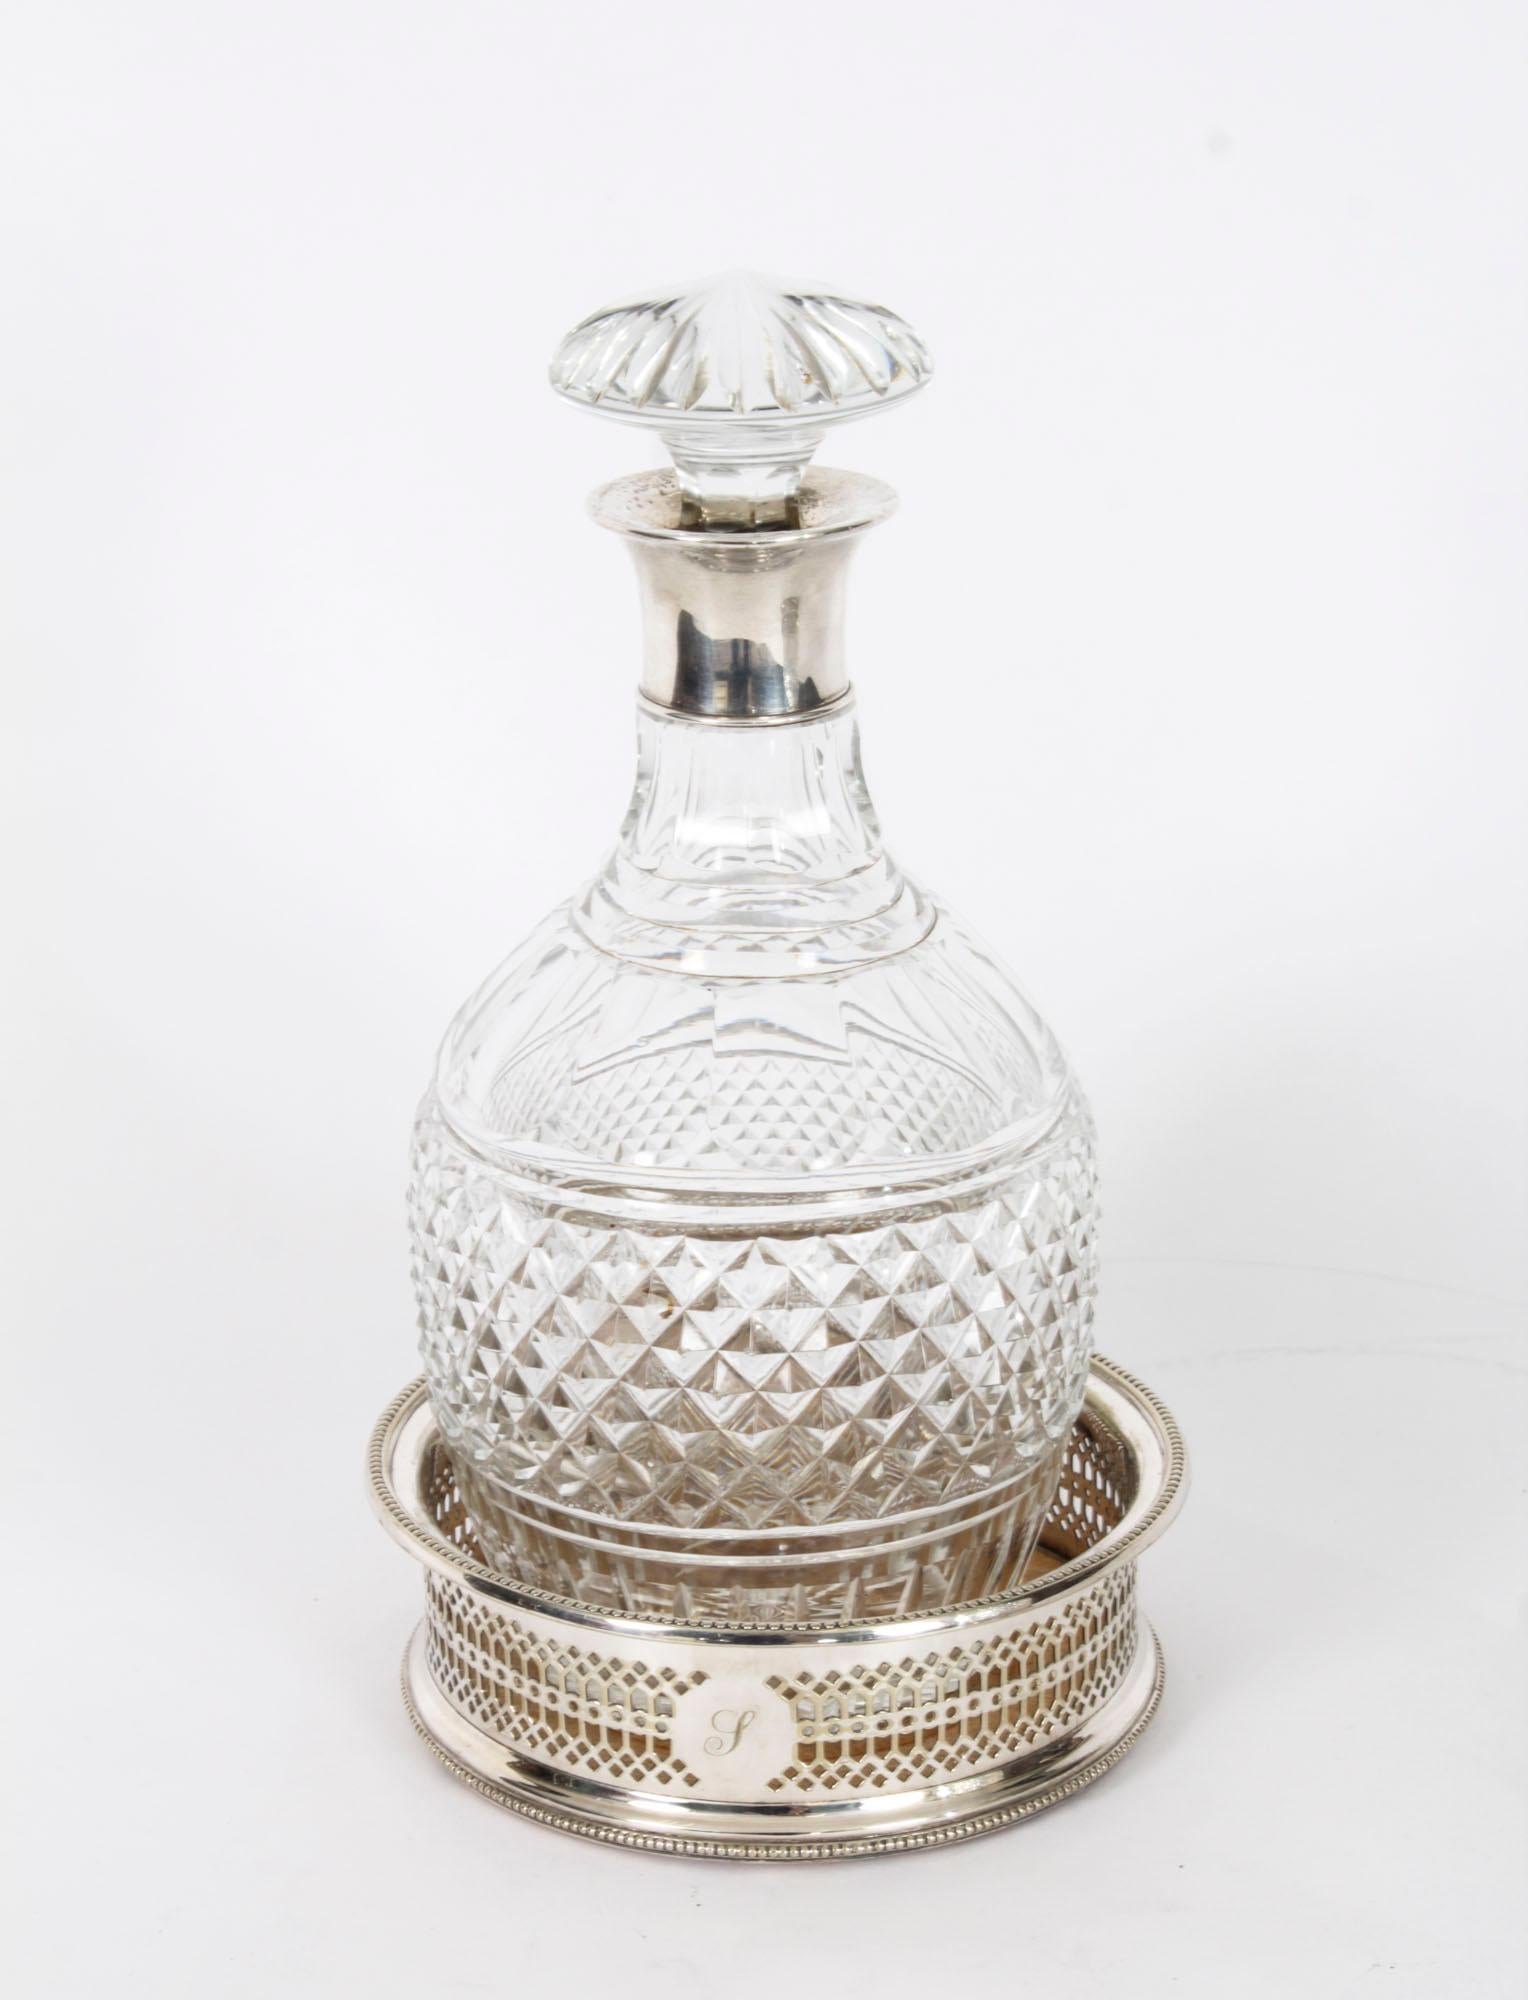 A superb pair of sterling silver mounted diamond pattern crystal decanters and coaster set, 19th century in date. 

The tapering cylinder shaped diamond pattern crystal decanters feature sterling silver mounted rims with faceted globular glass